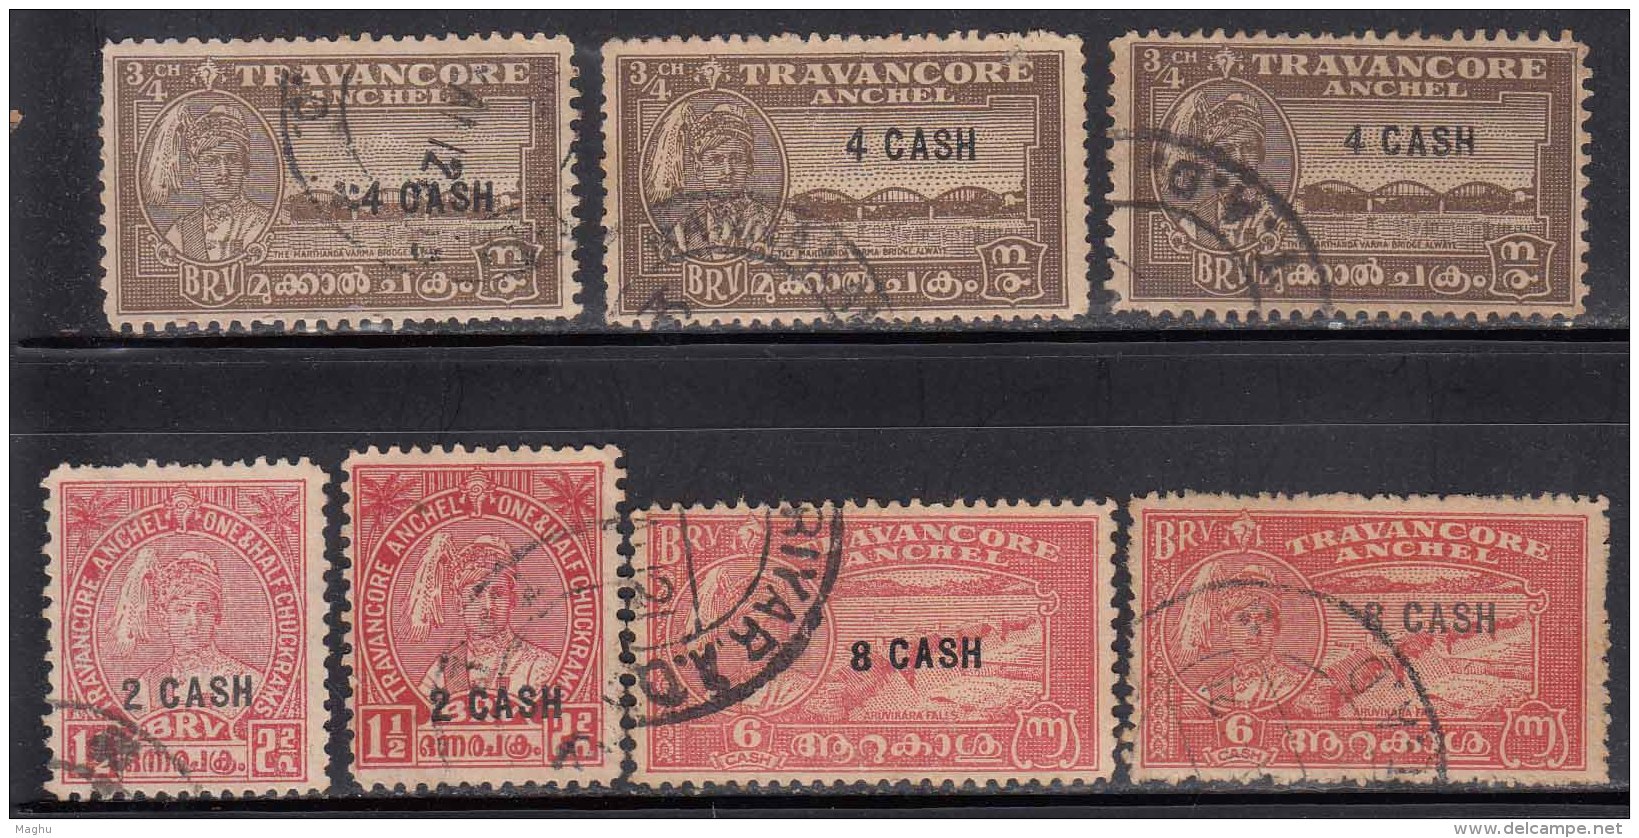 3v Perf., / Shade Varities, Surcharge Issue Of Travancore, 1943 Used, British India State - Cochin